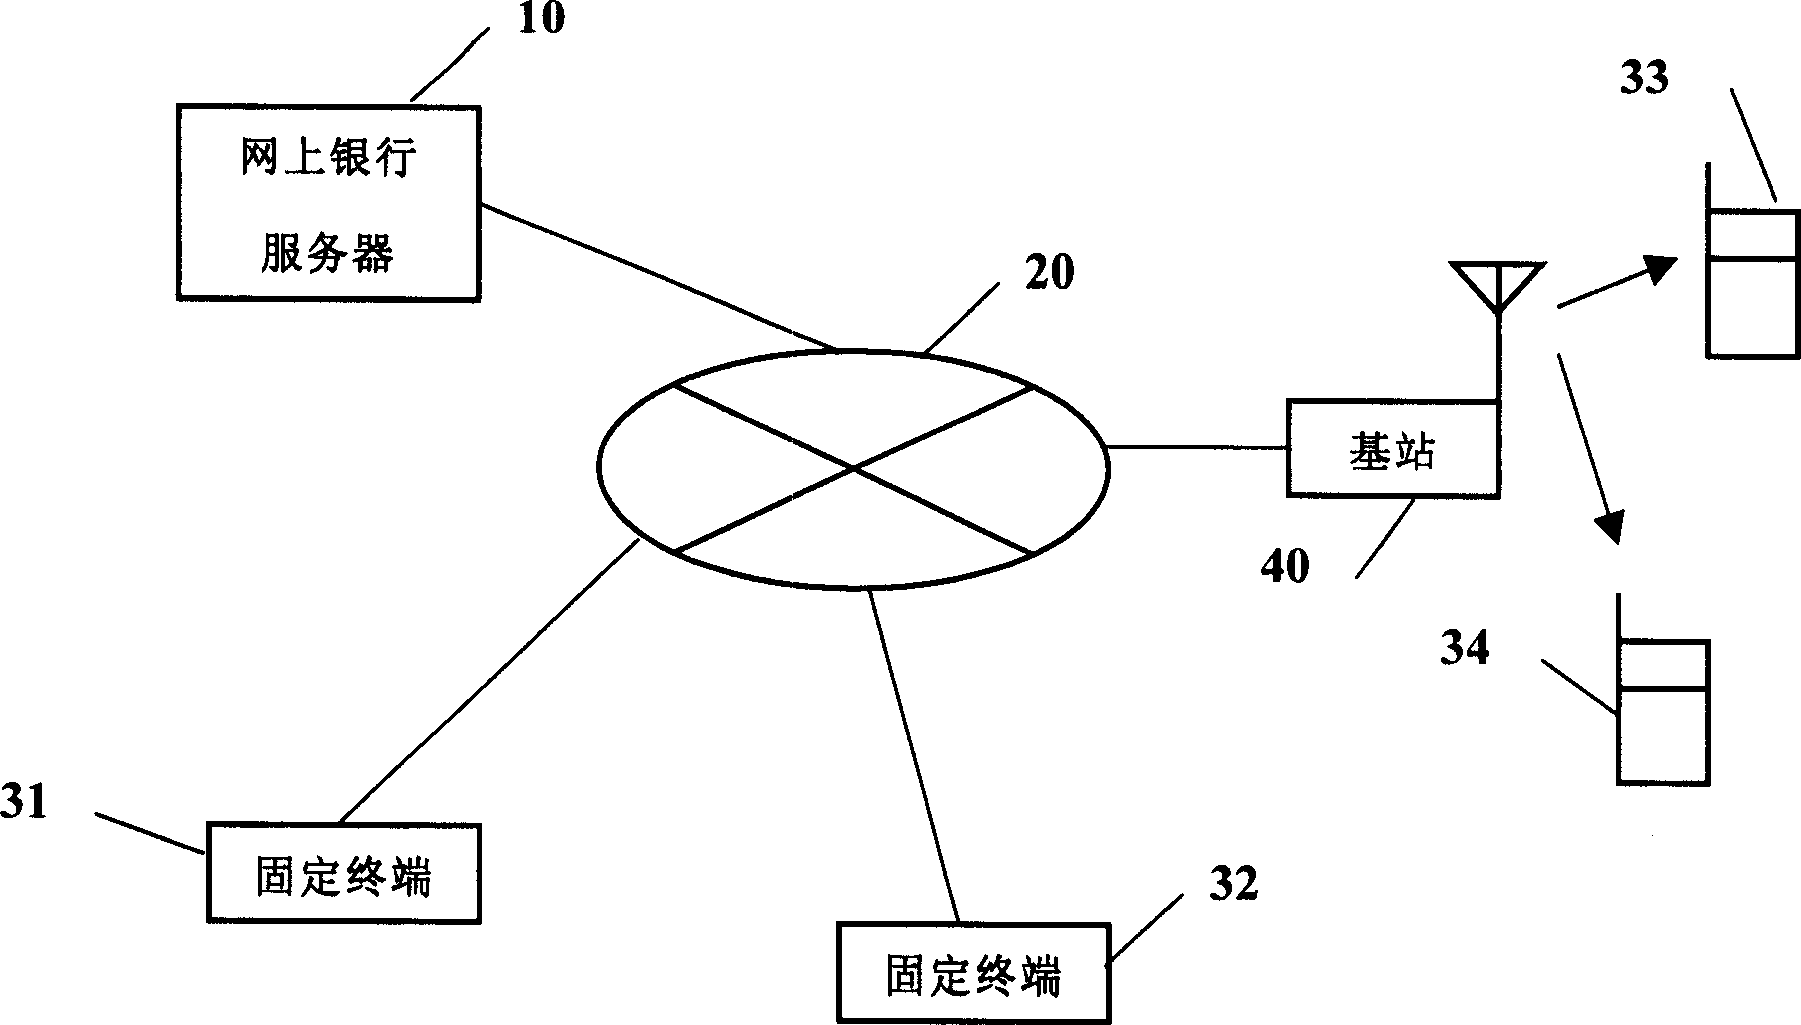 Method for verifying advance recording information over network